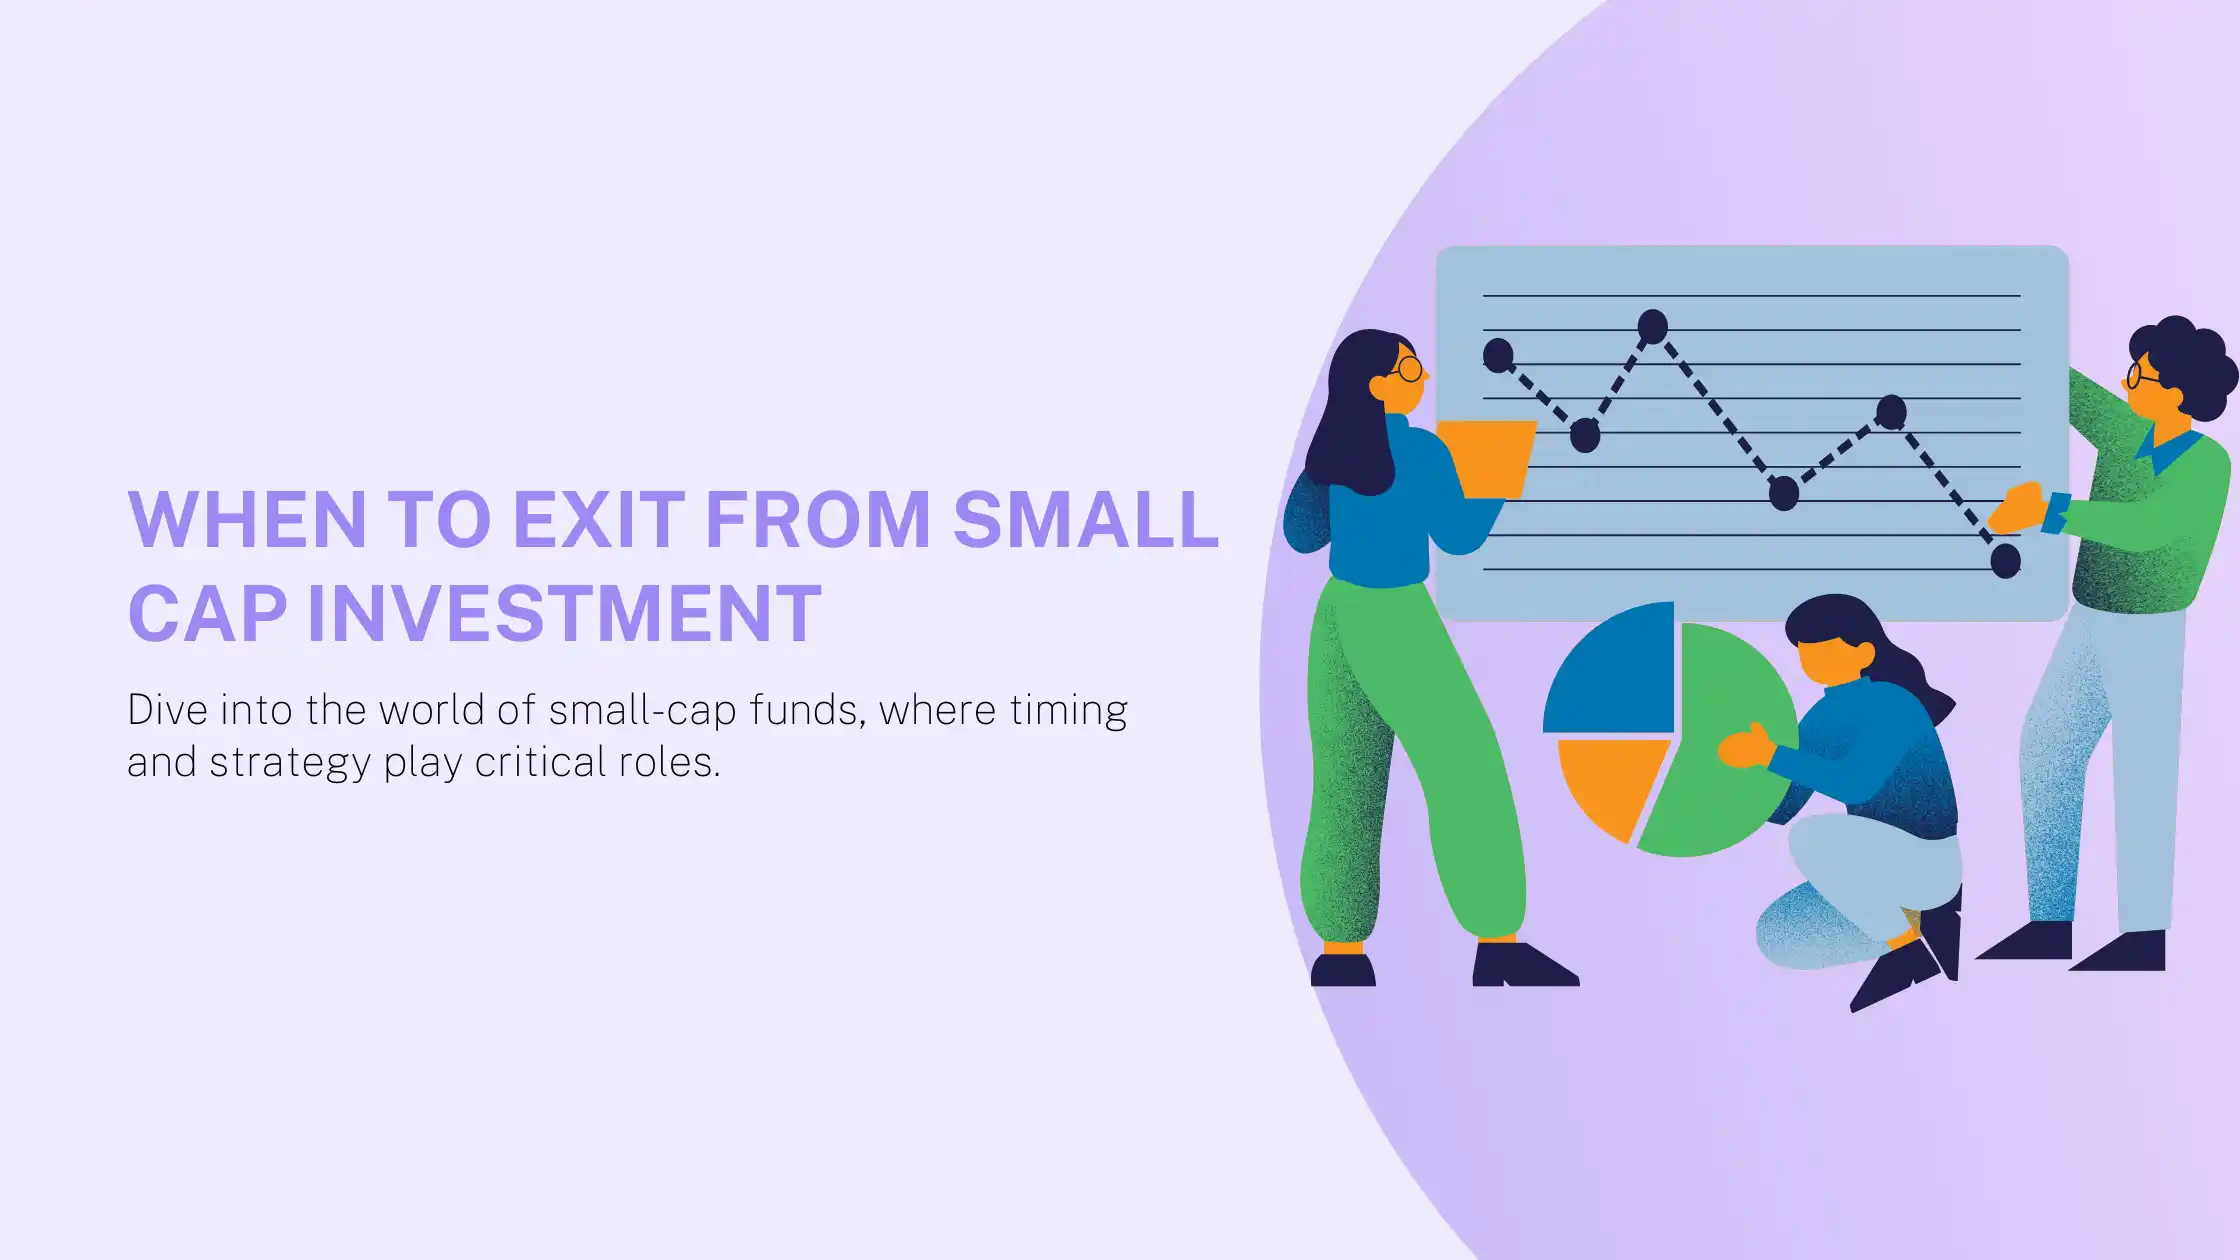 When To Exit from Small Cap Investment